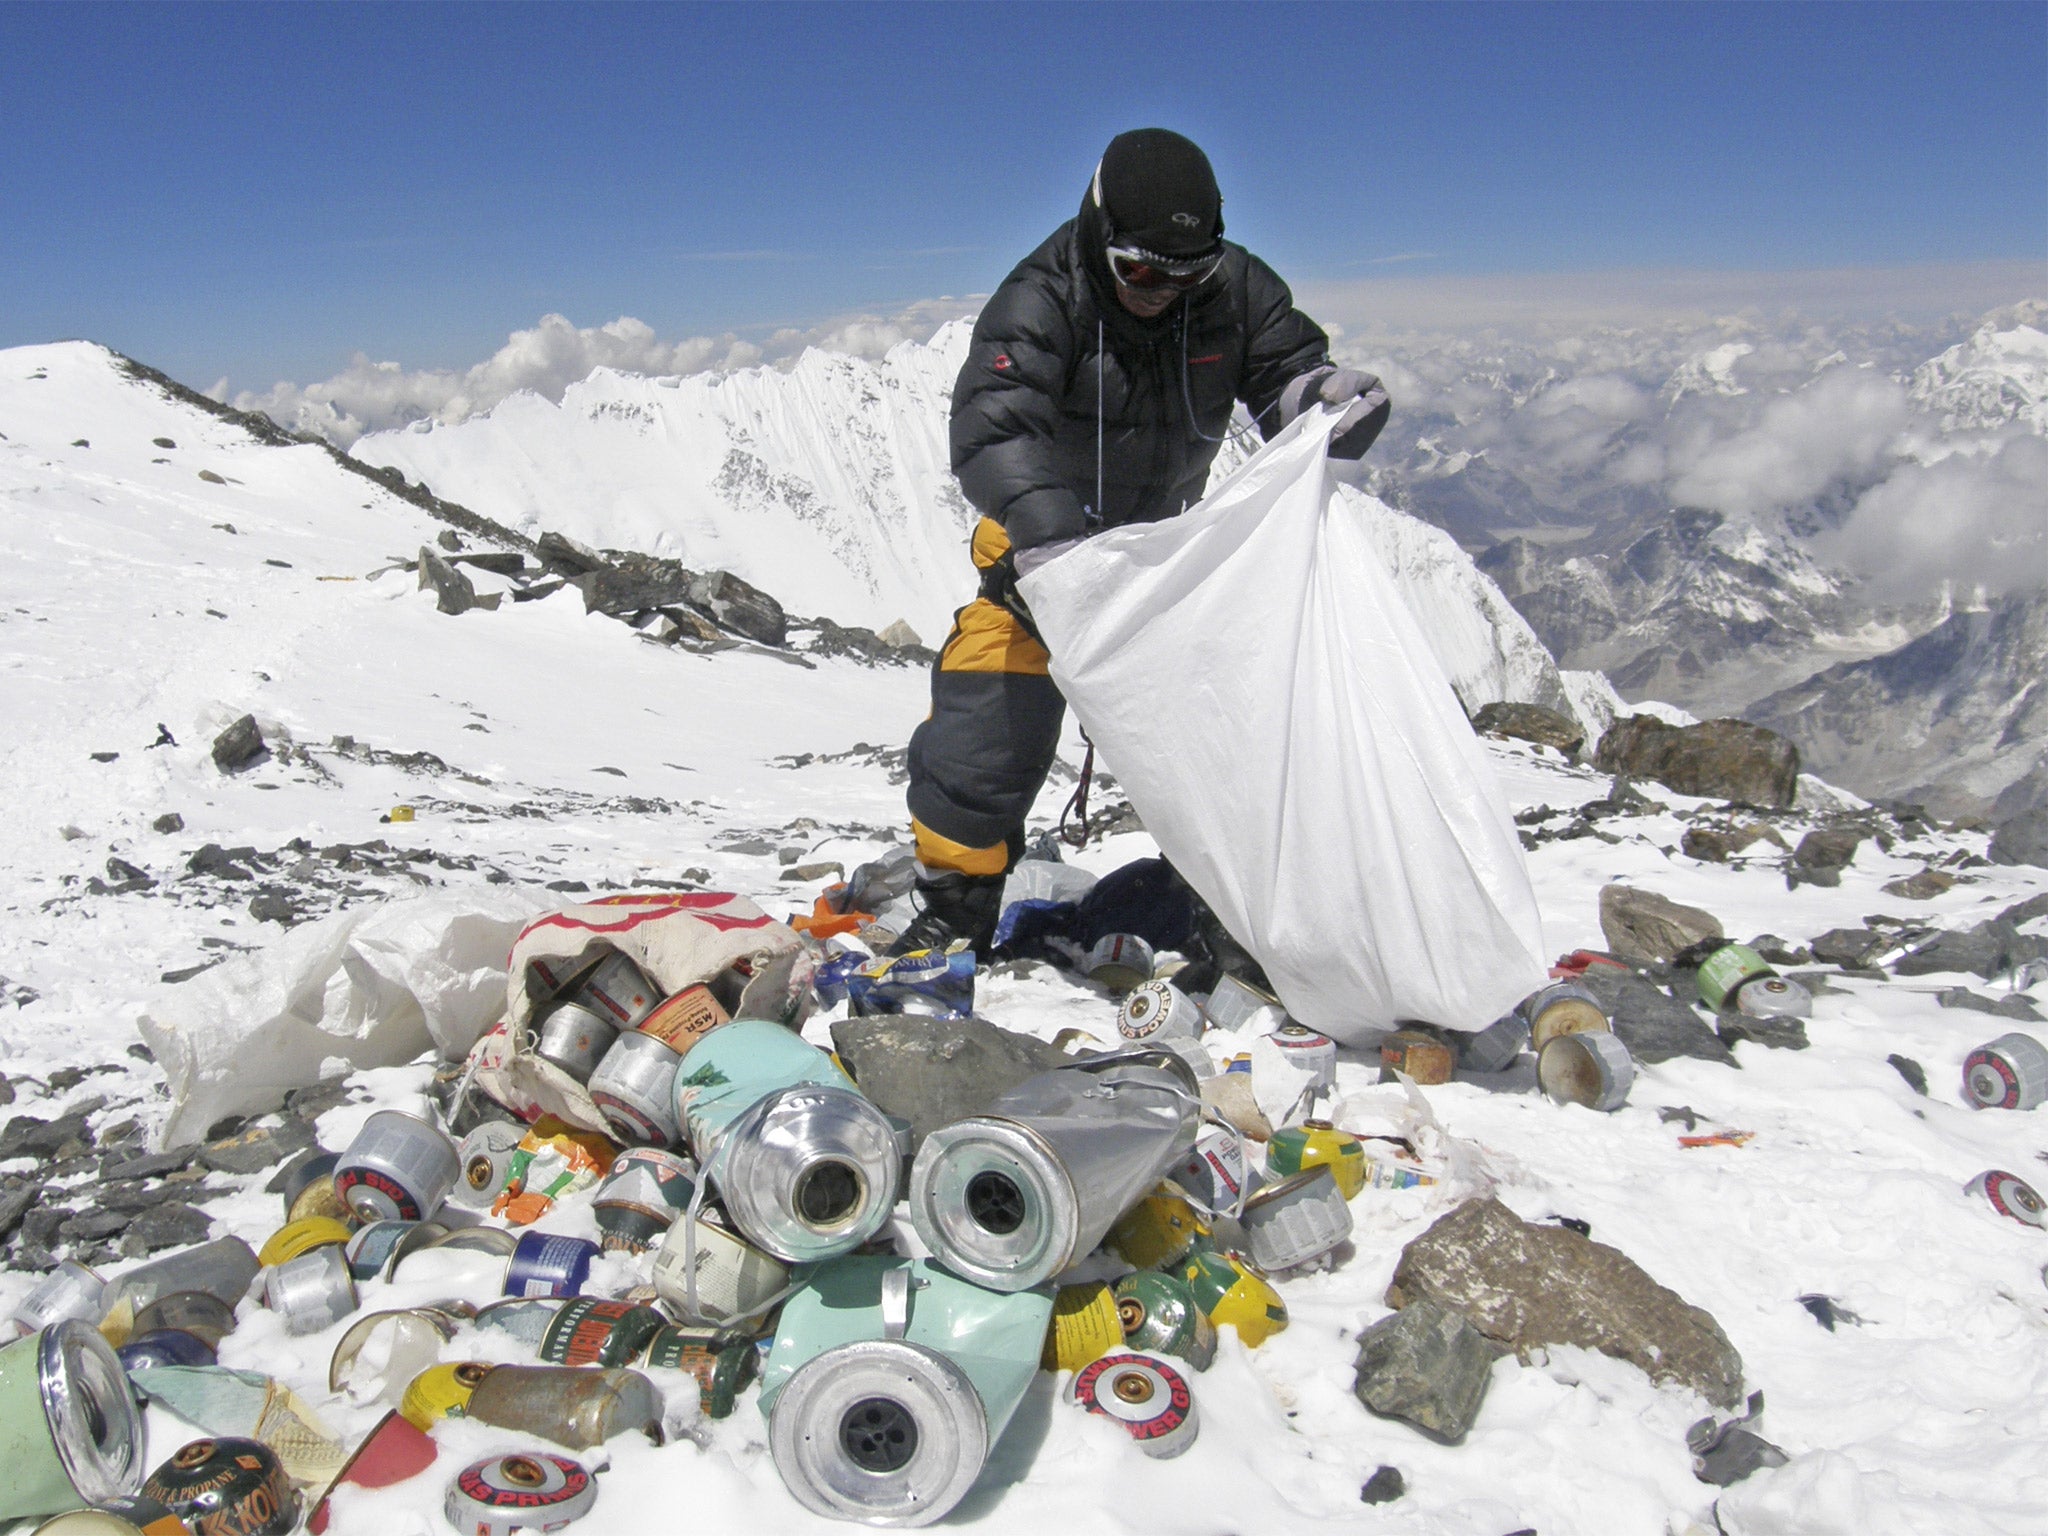 A Nepalese sherpa collects garbage, left by climbers, during an Everest clean-up expedition at Mount Everest in 2010